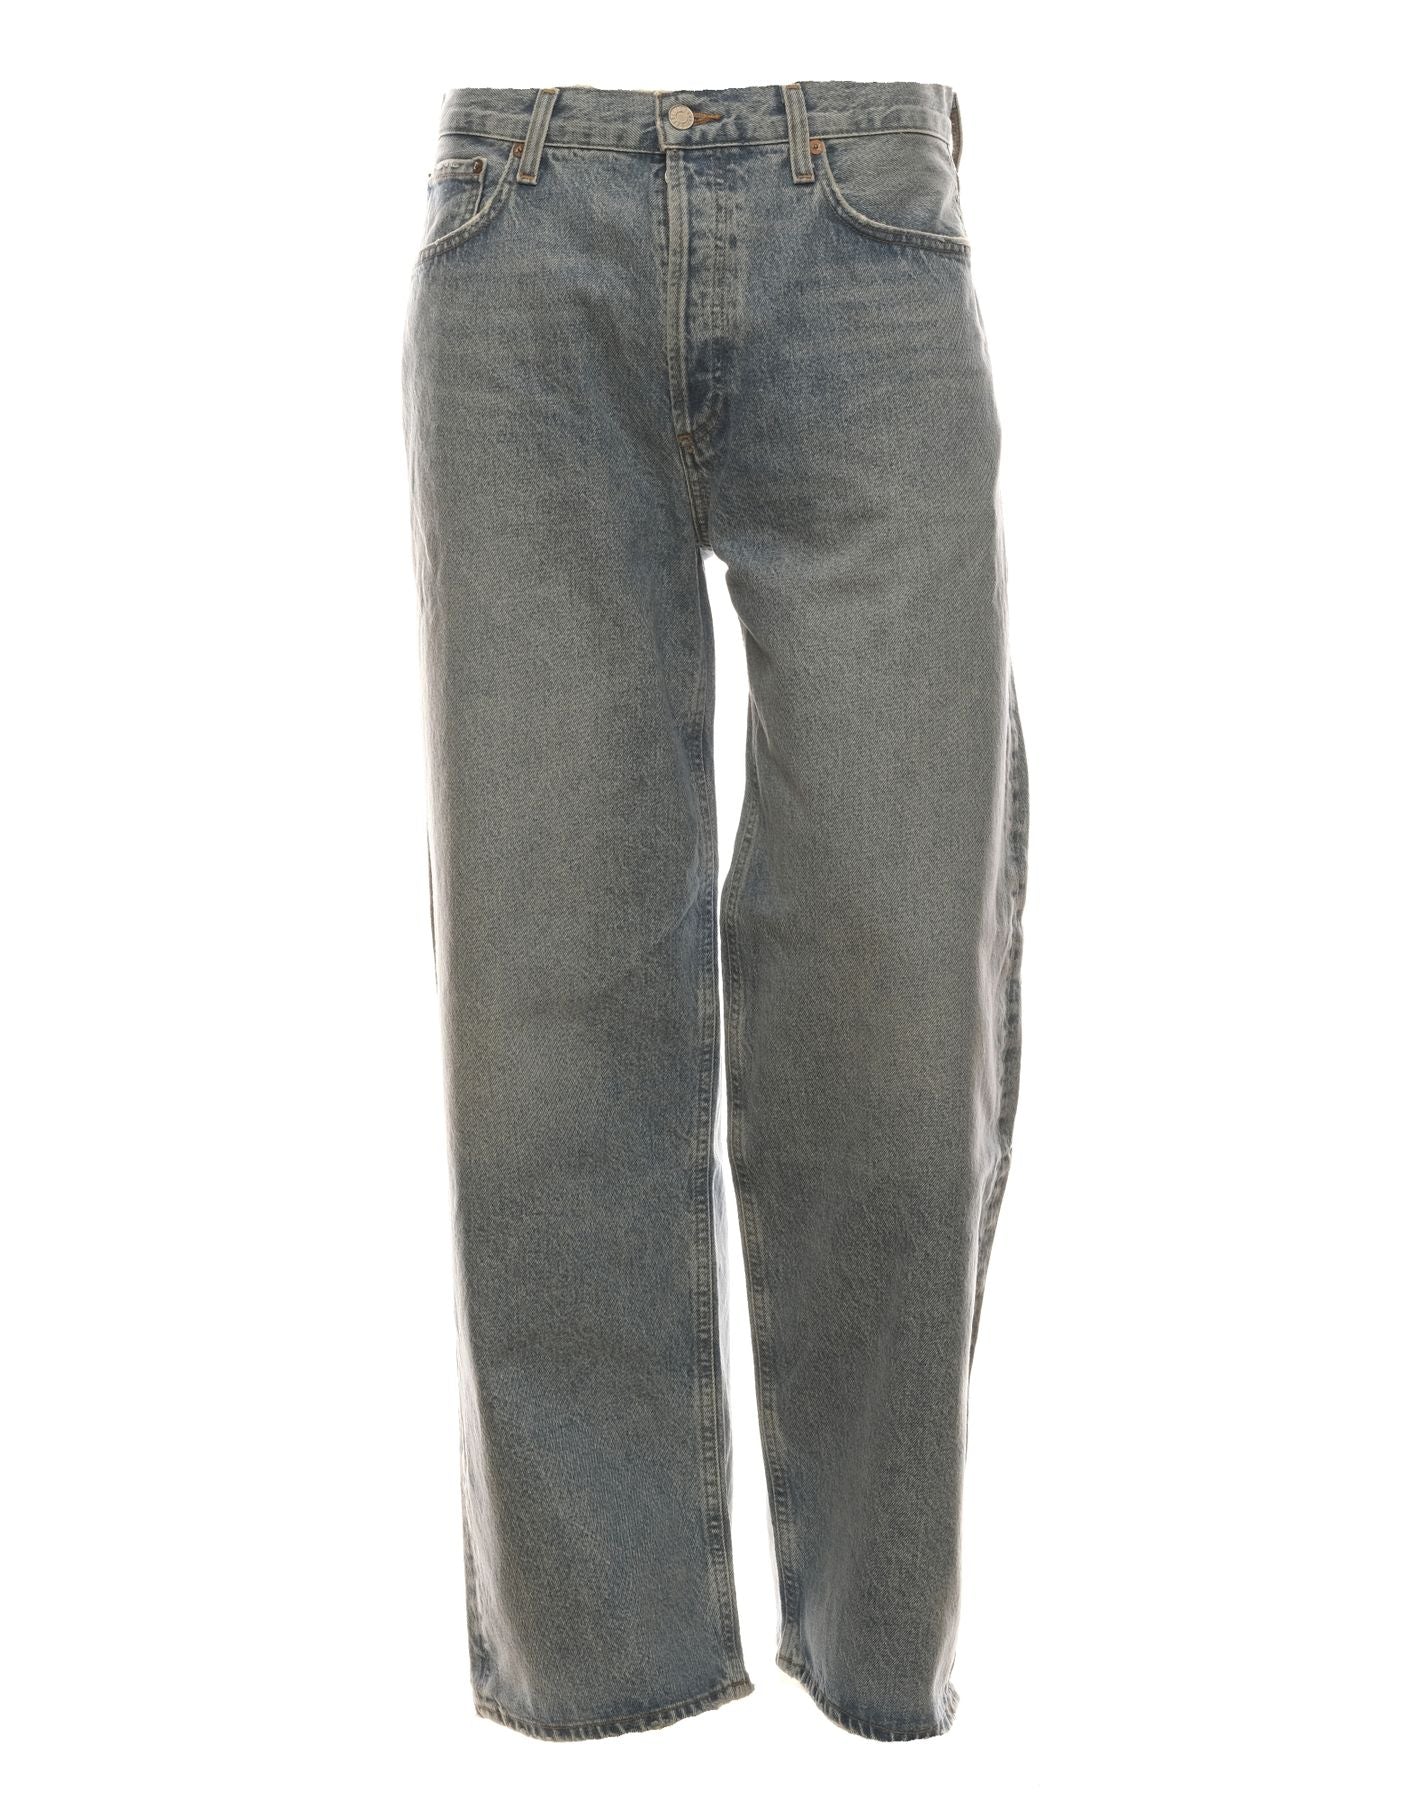 Jeans for man A640 1535 LIBERTINE Agolde